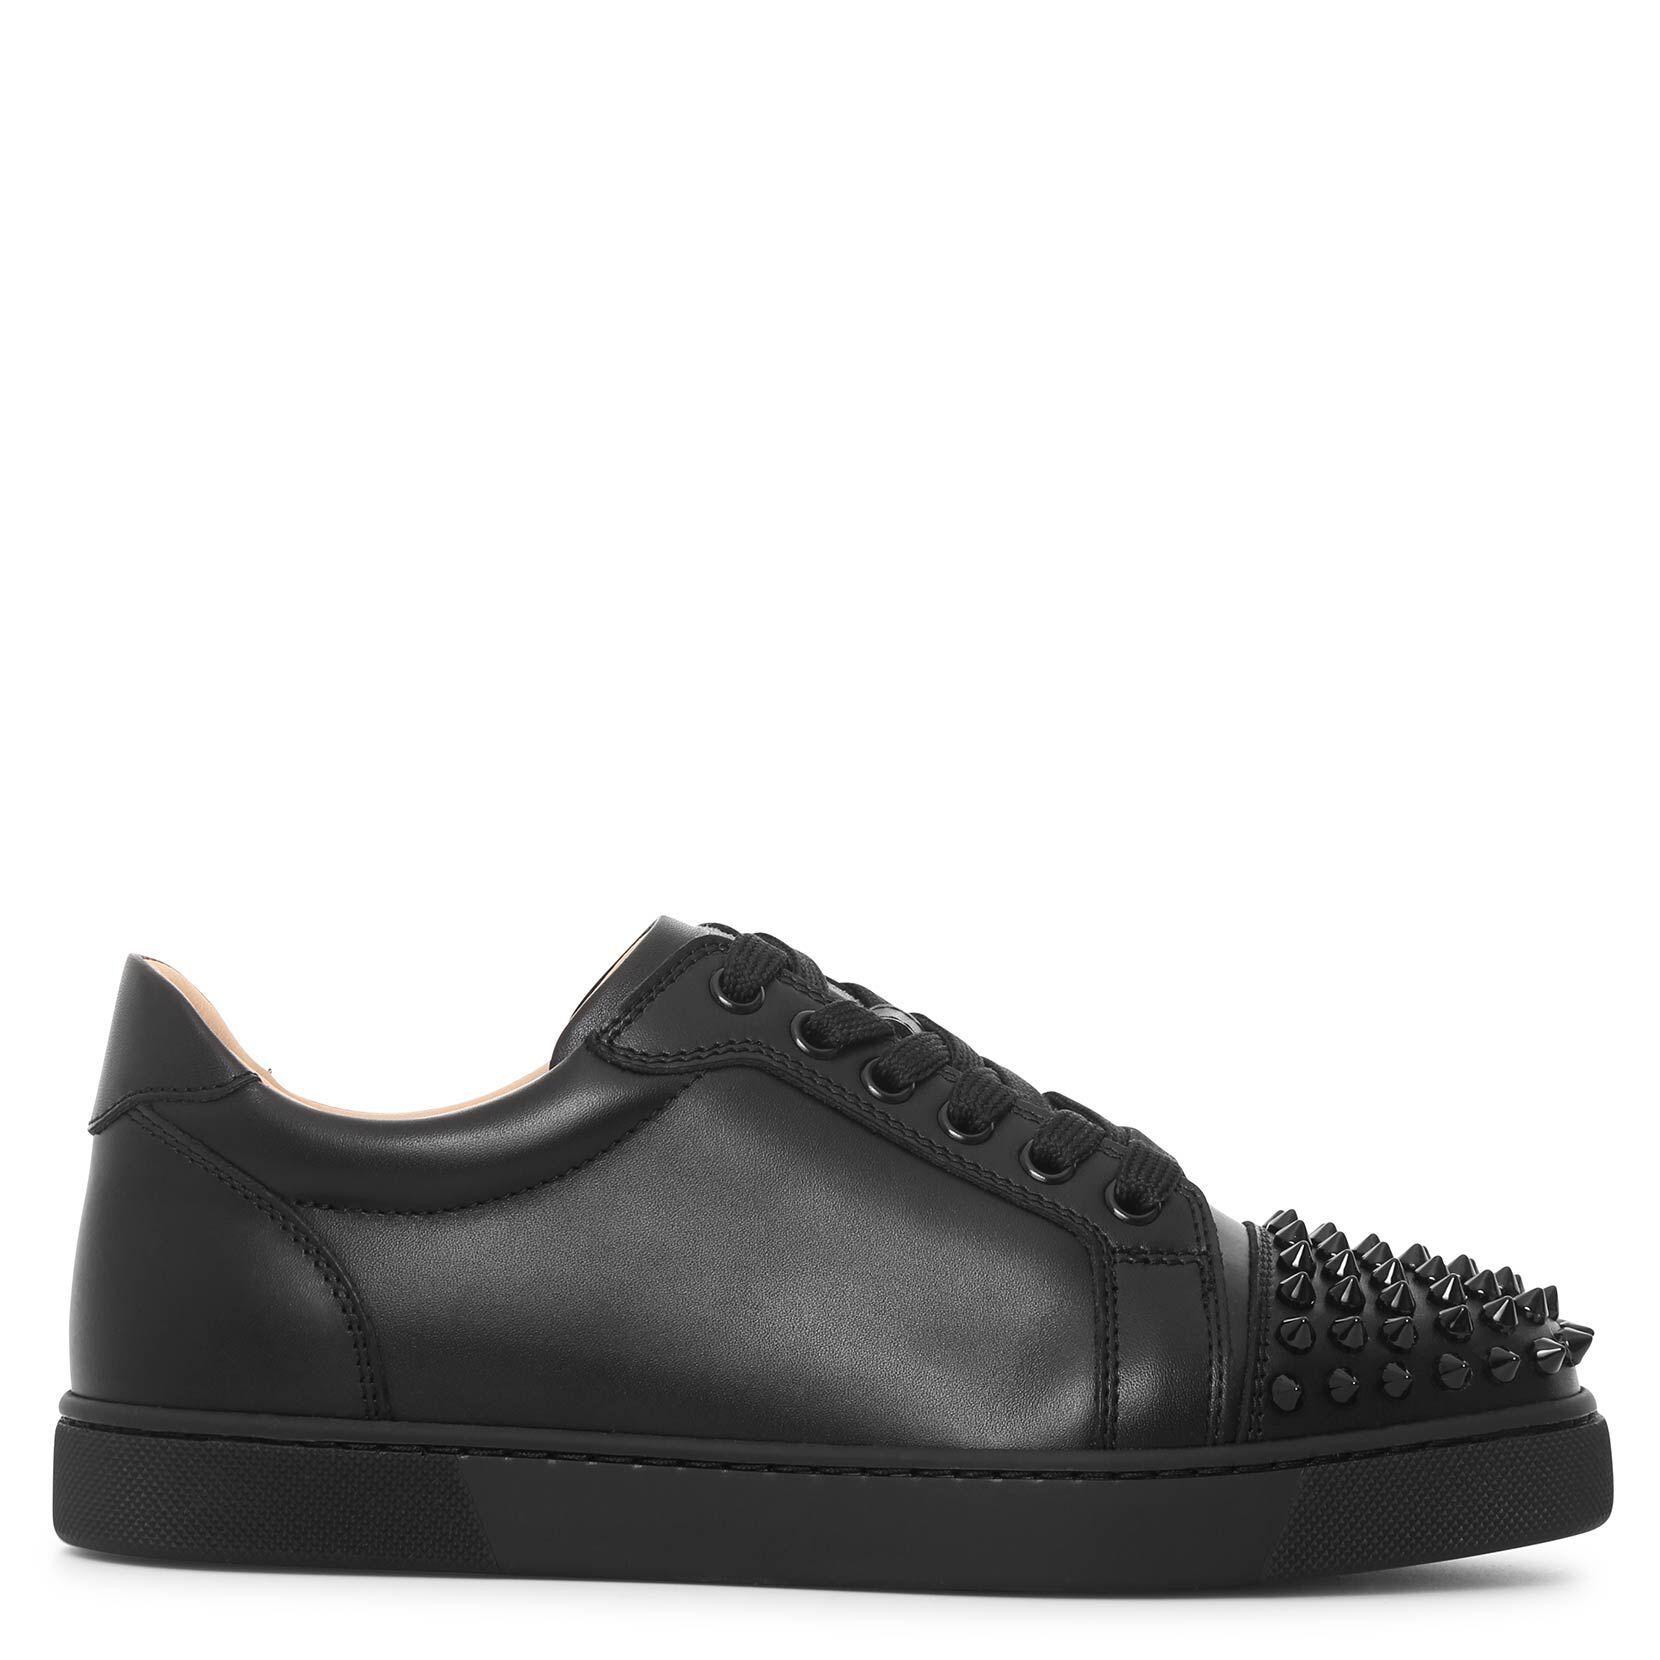 Christian Louboutin Vieira Spike Leather Sneaker in Black - Save 46% - Lyst